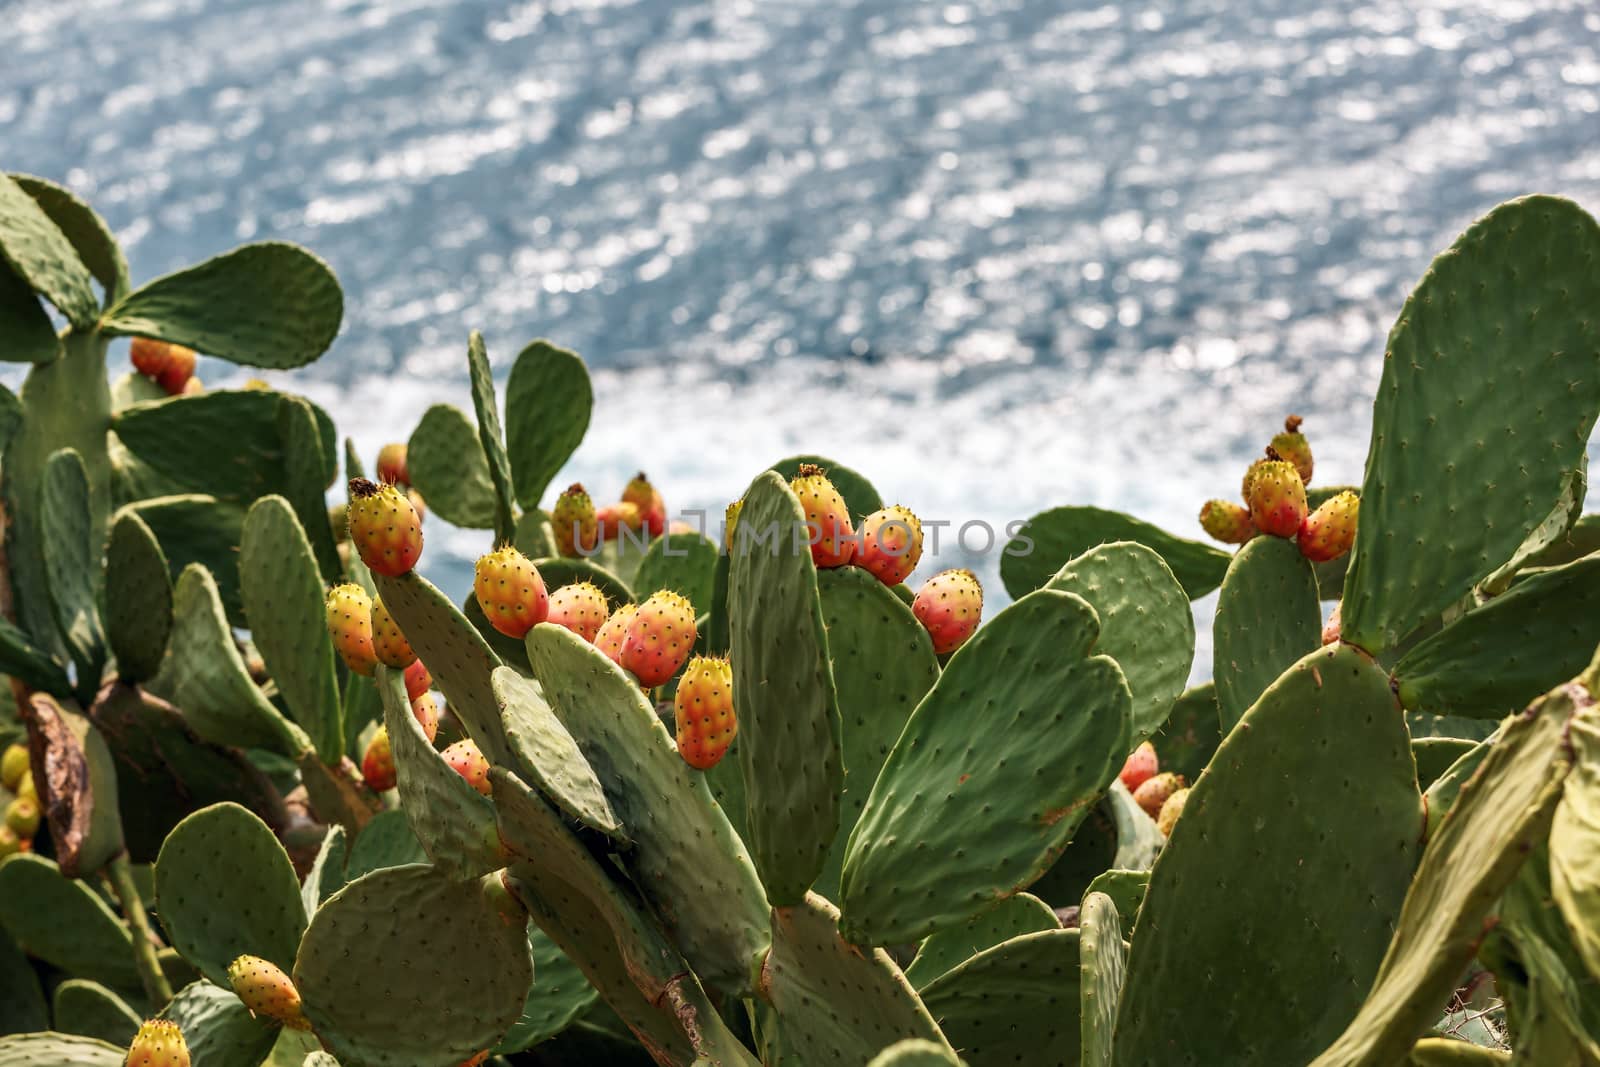 blooming cactus on the coast, overlooking the sea, blurred background, Costa Brava, Spain.



